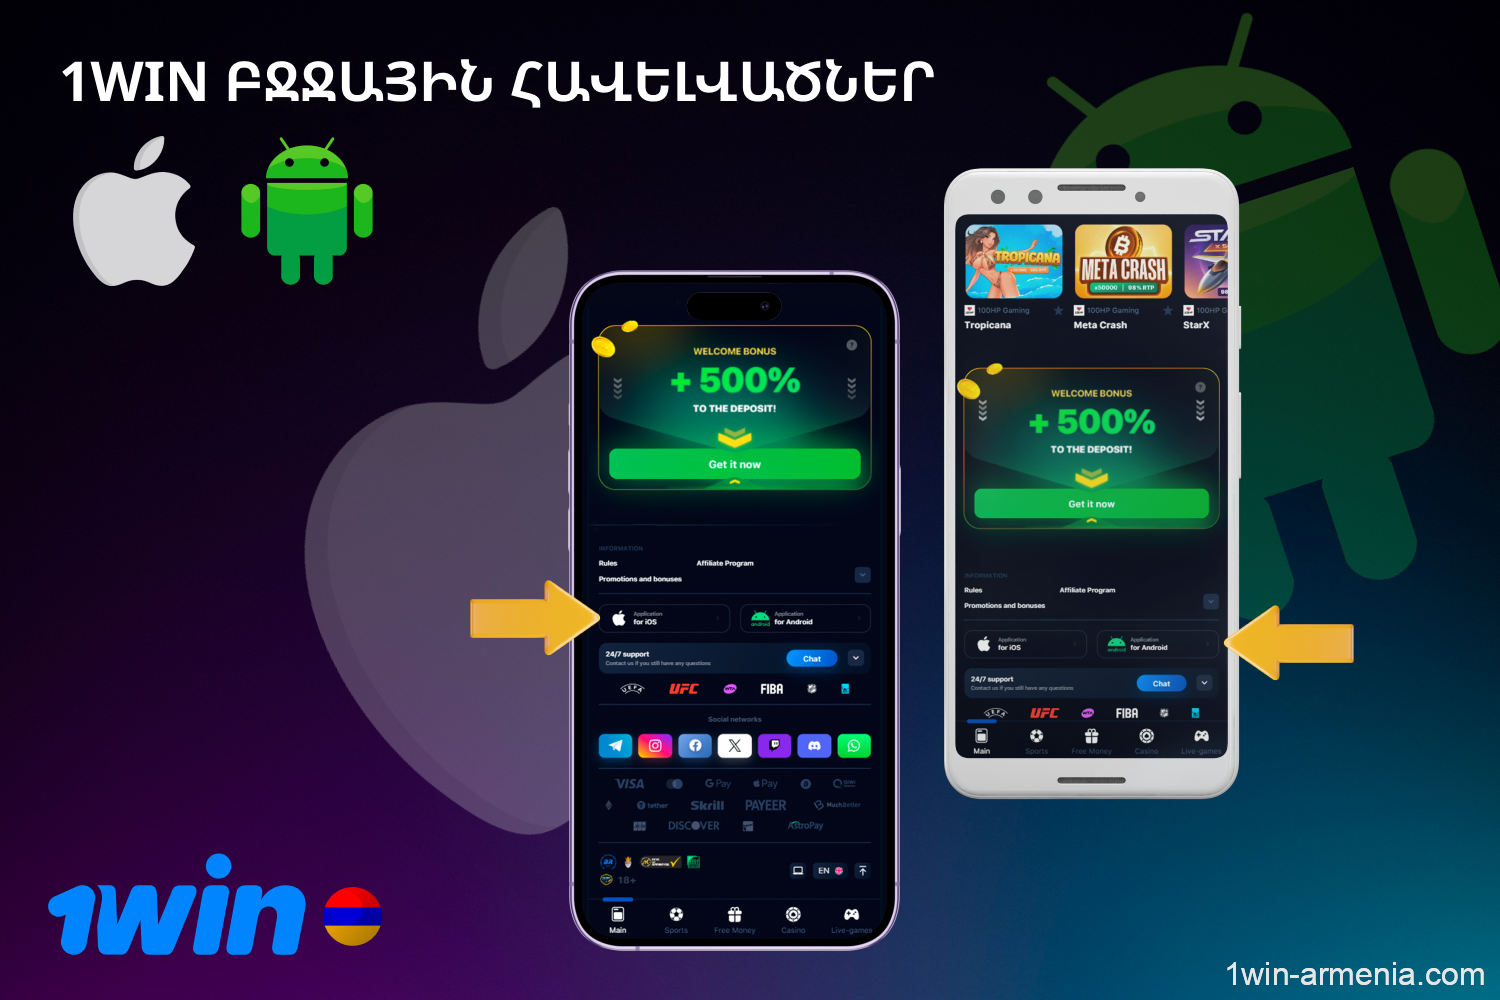 Armenian users can easily and quickly download and install the latest version of 1win mobile application from the official website